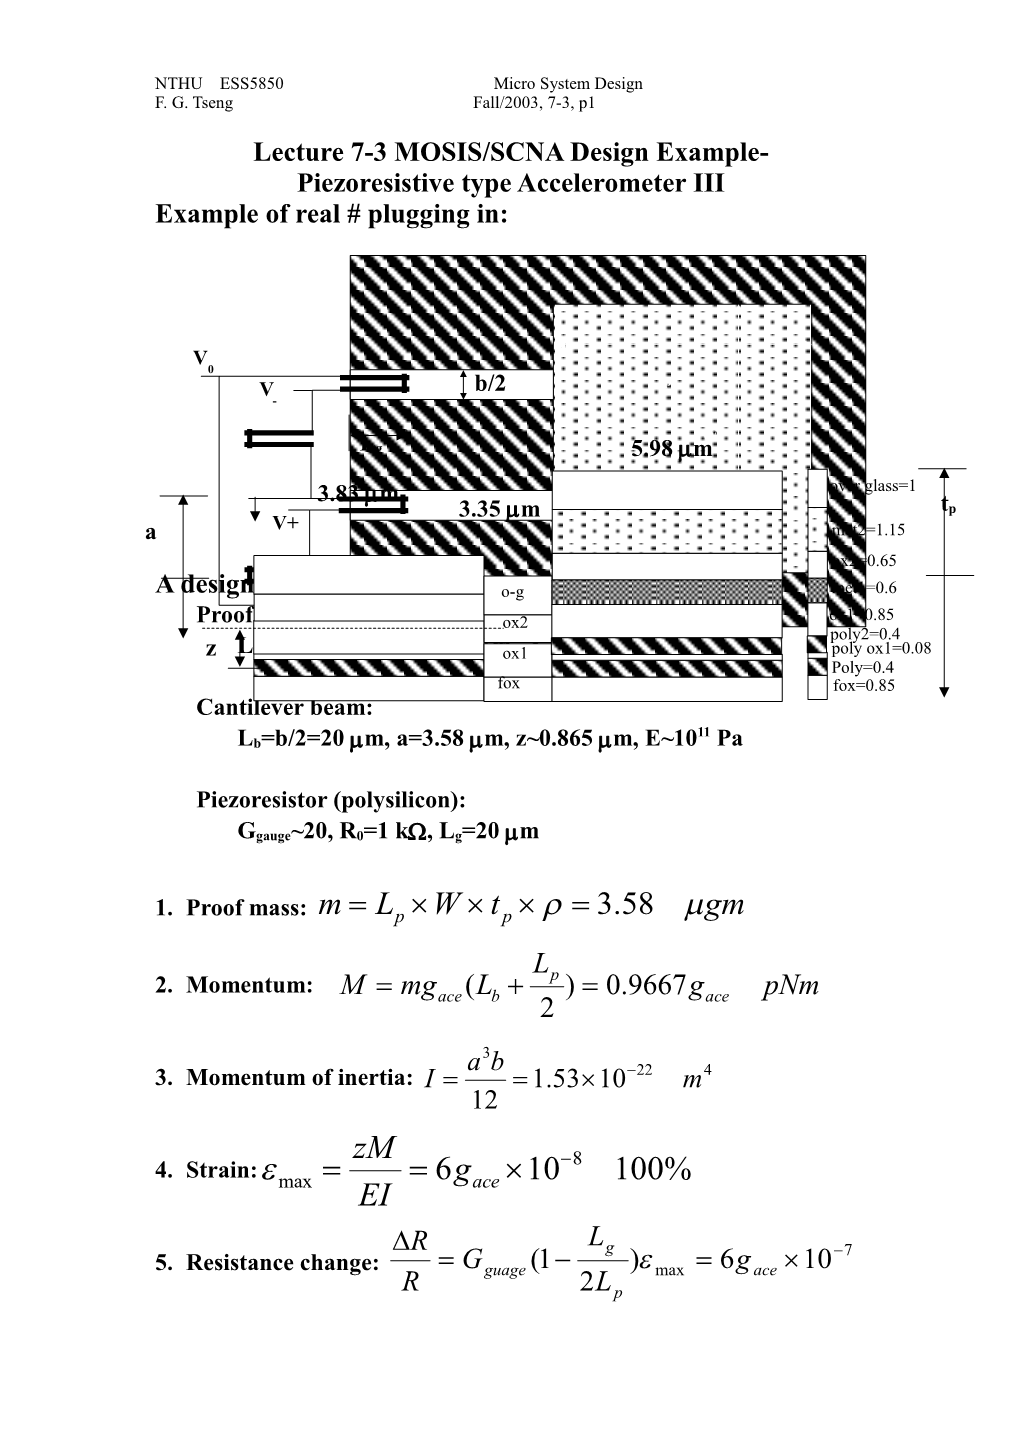 Lecture 7-3 MOSIS/SCNA Design Example